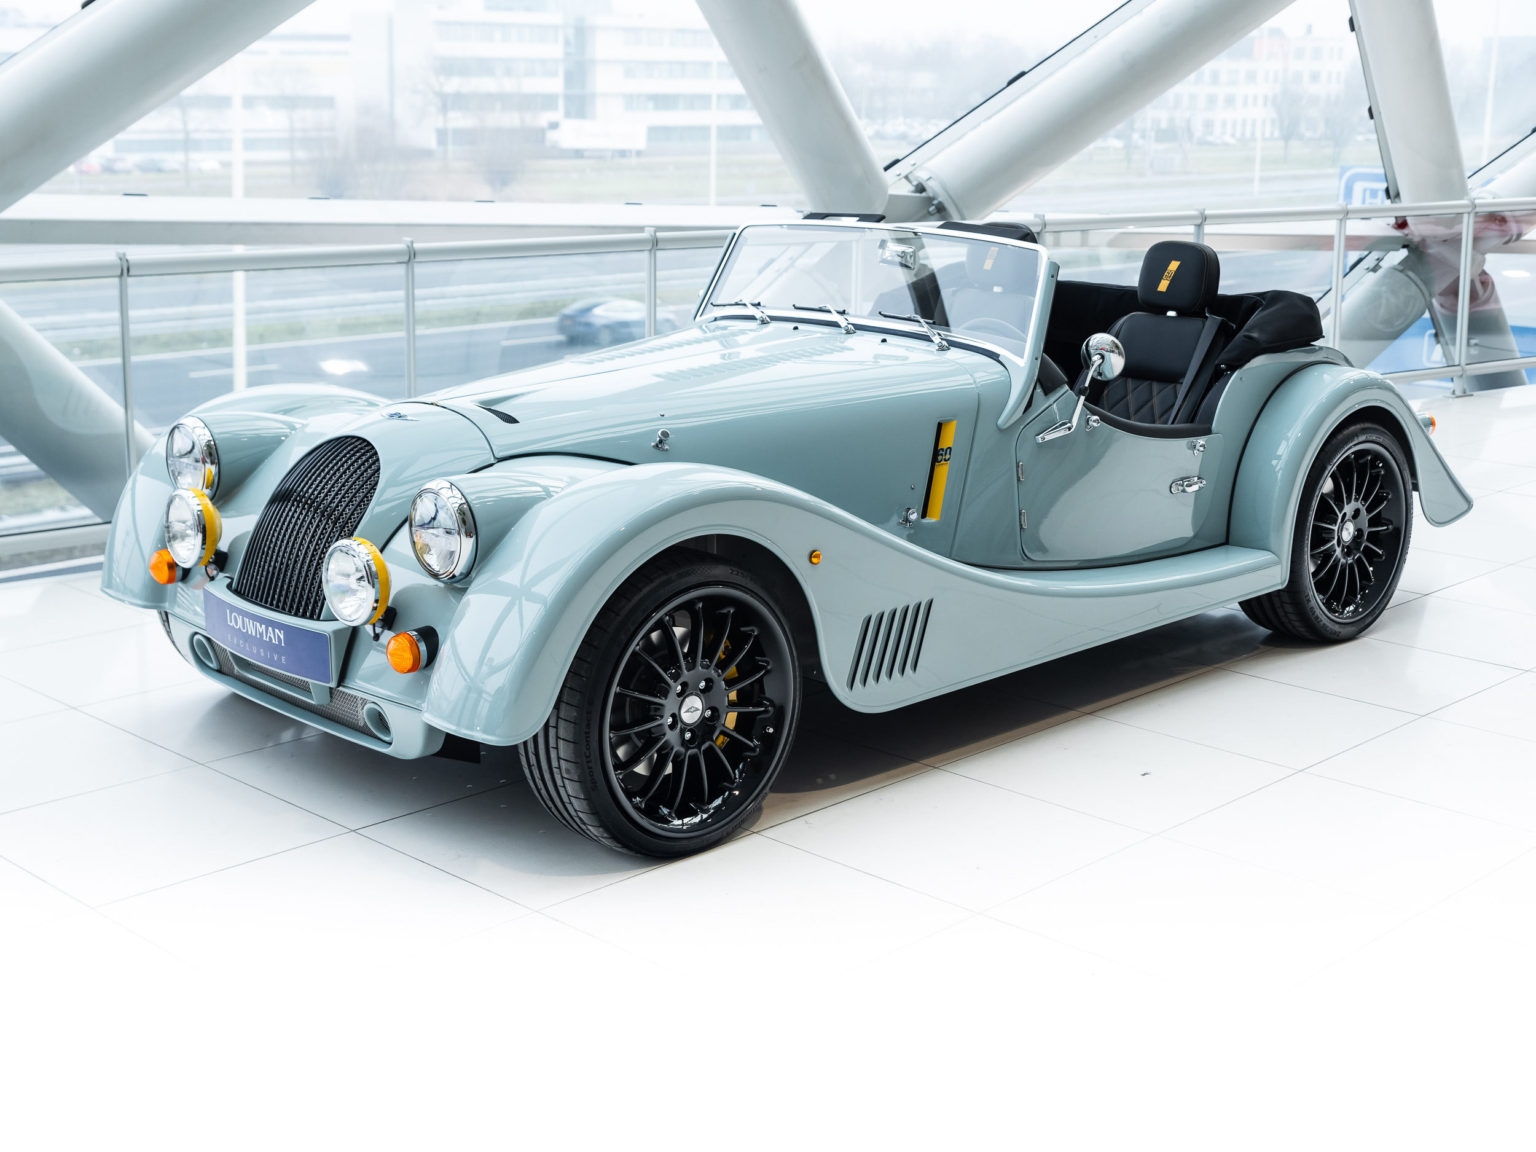 Morgan has made five new models to celebrate a significant anniversary with its Dutch dealership.